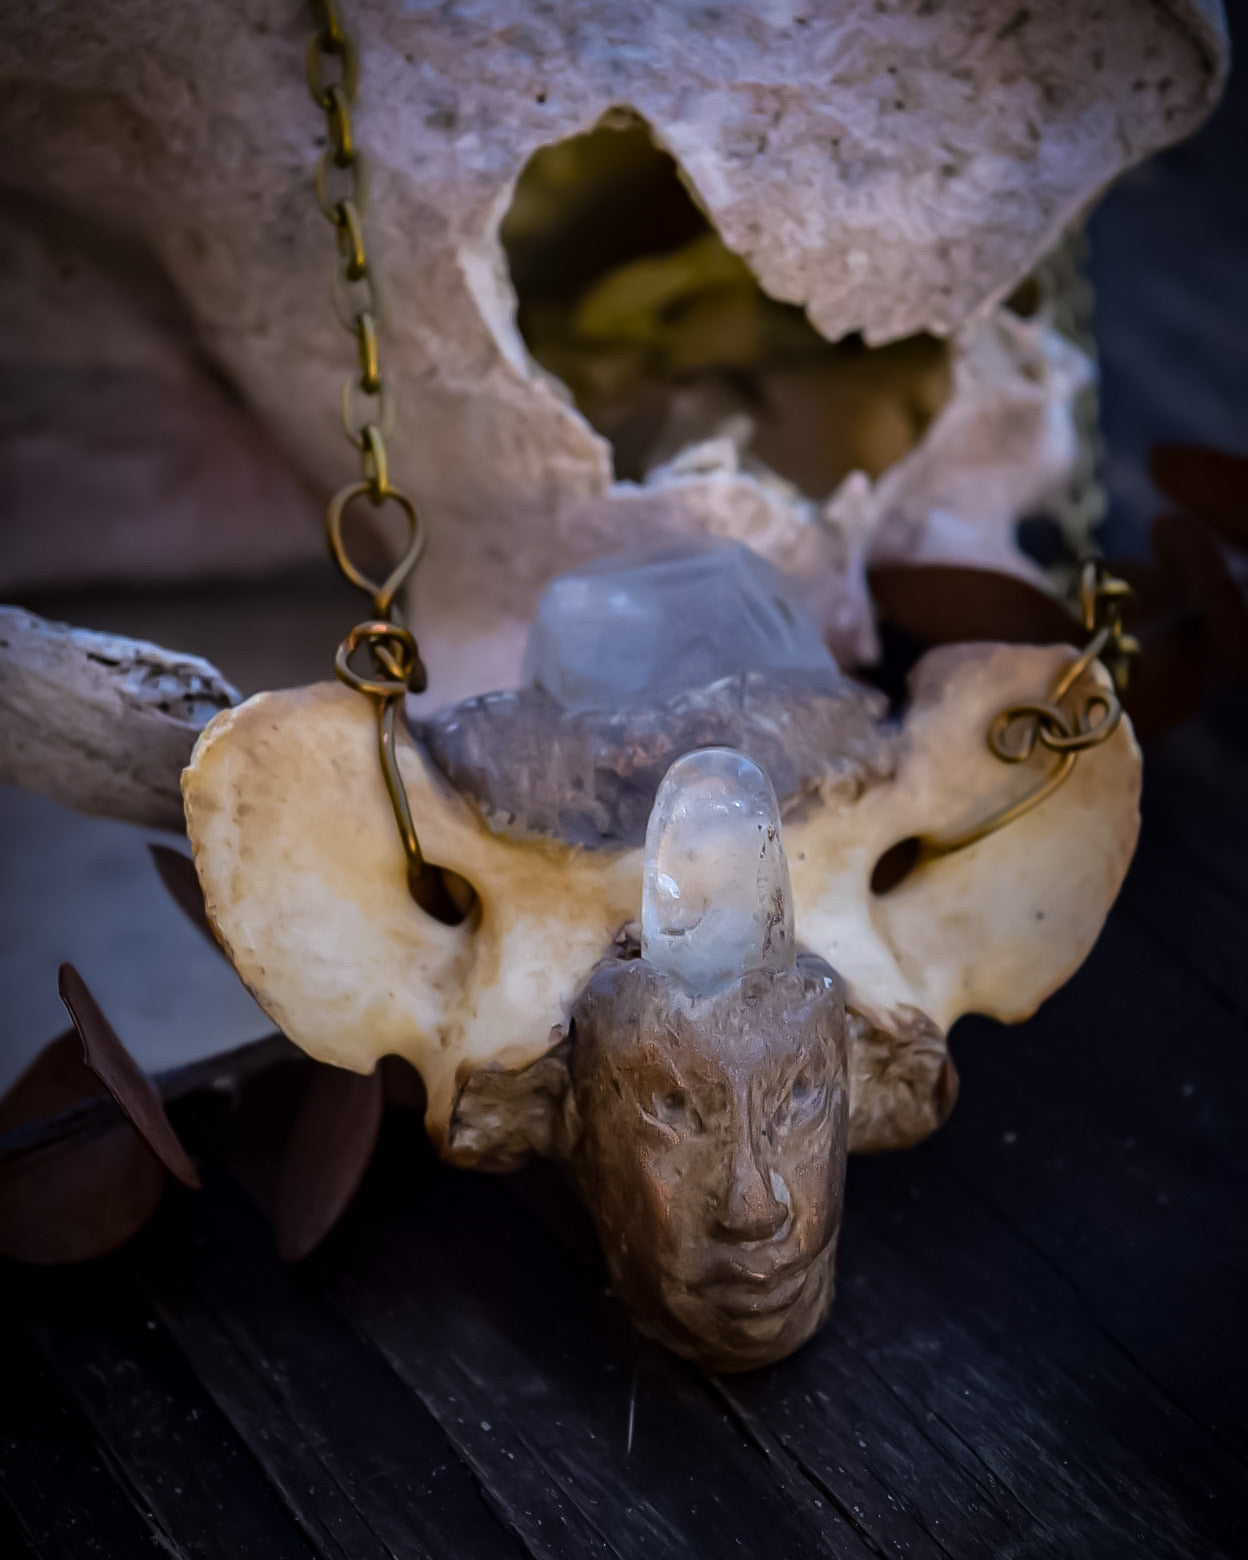 Expansion Necklace with Quartz Crystal for Travel Into the Other Realms and Into the Self